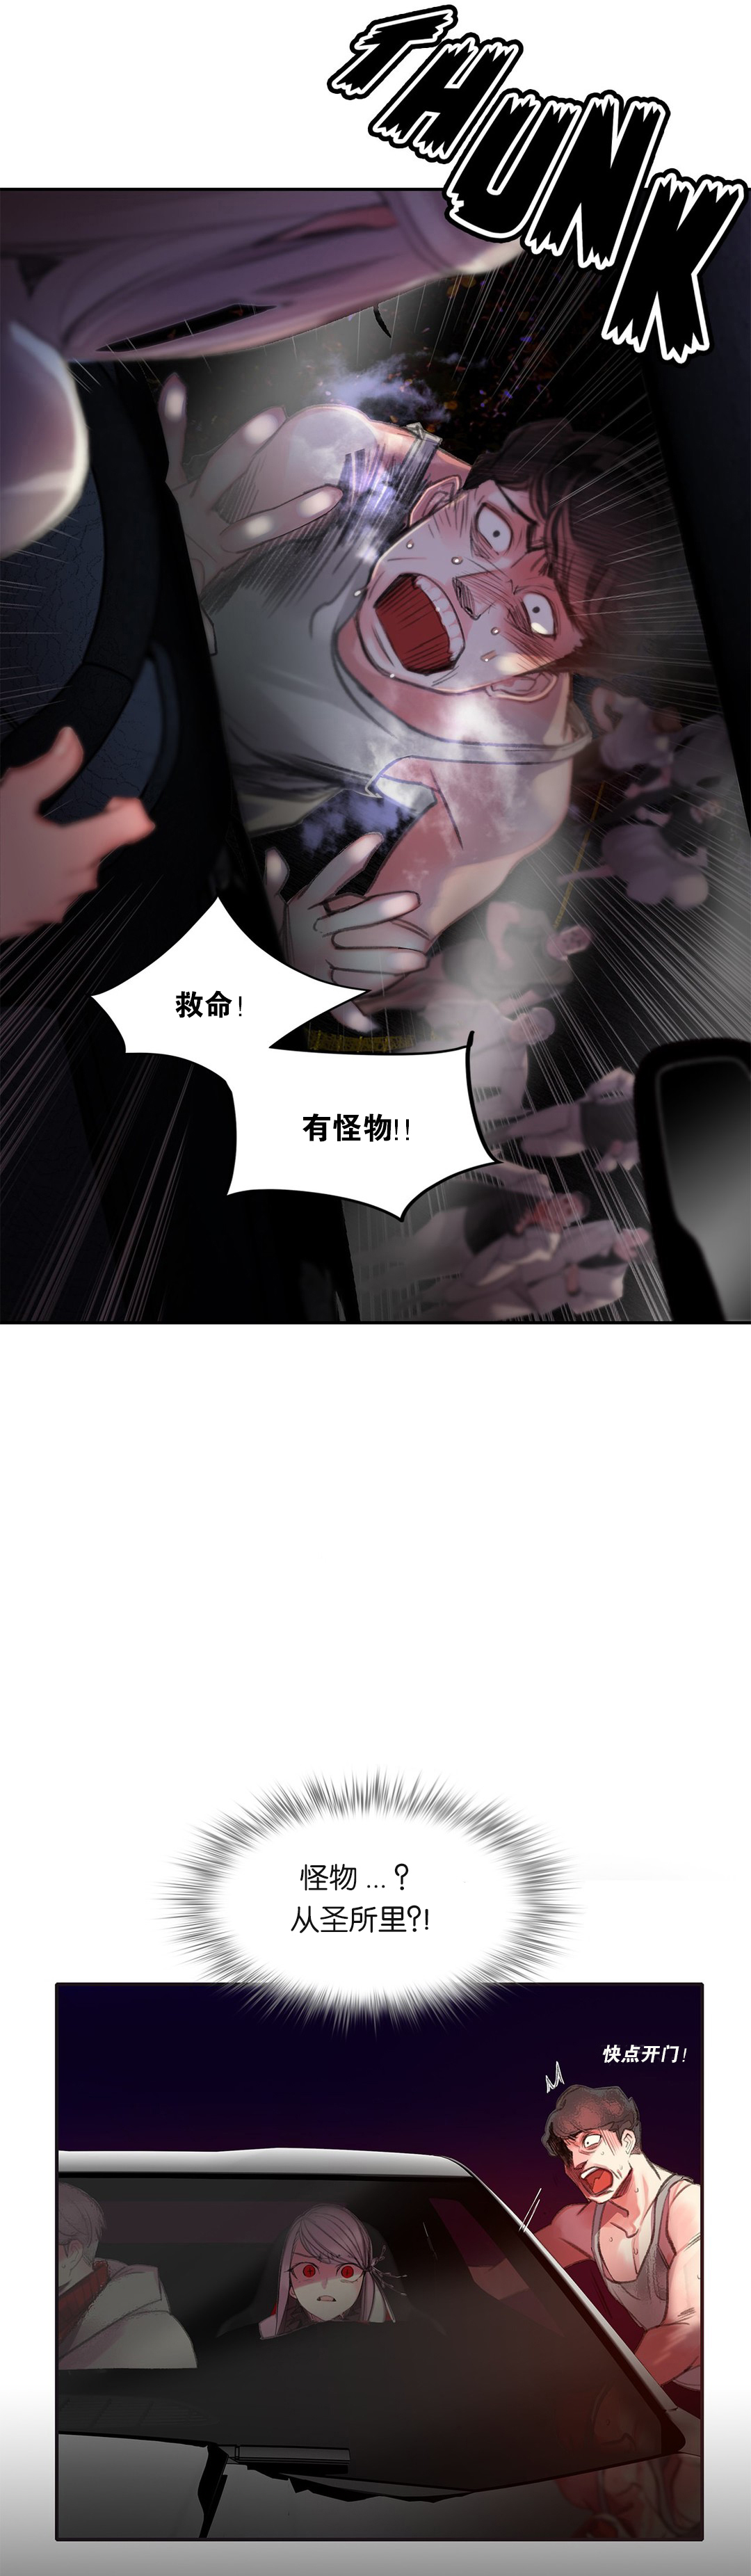 [Juder] Lilith`s Cord (第二季) Ch.61-66 [Chinese] [aaatwist个人汉化] [Ongoing] page 15 full